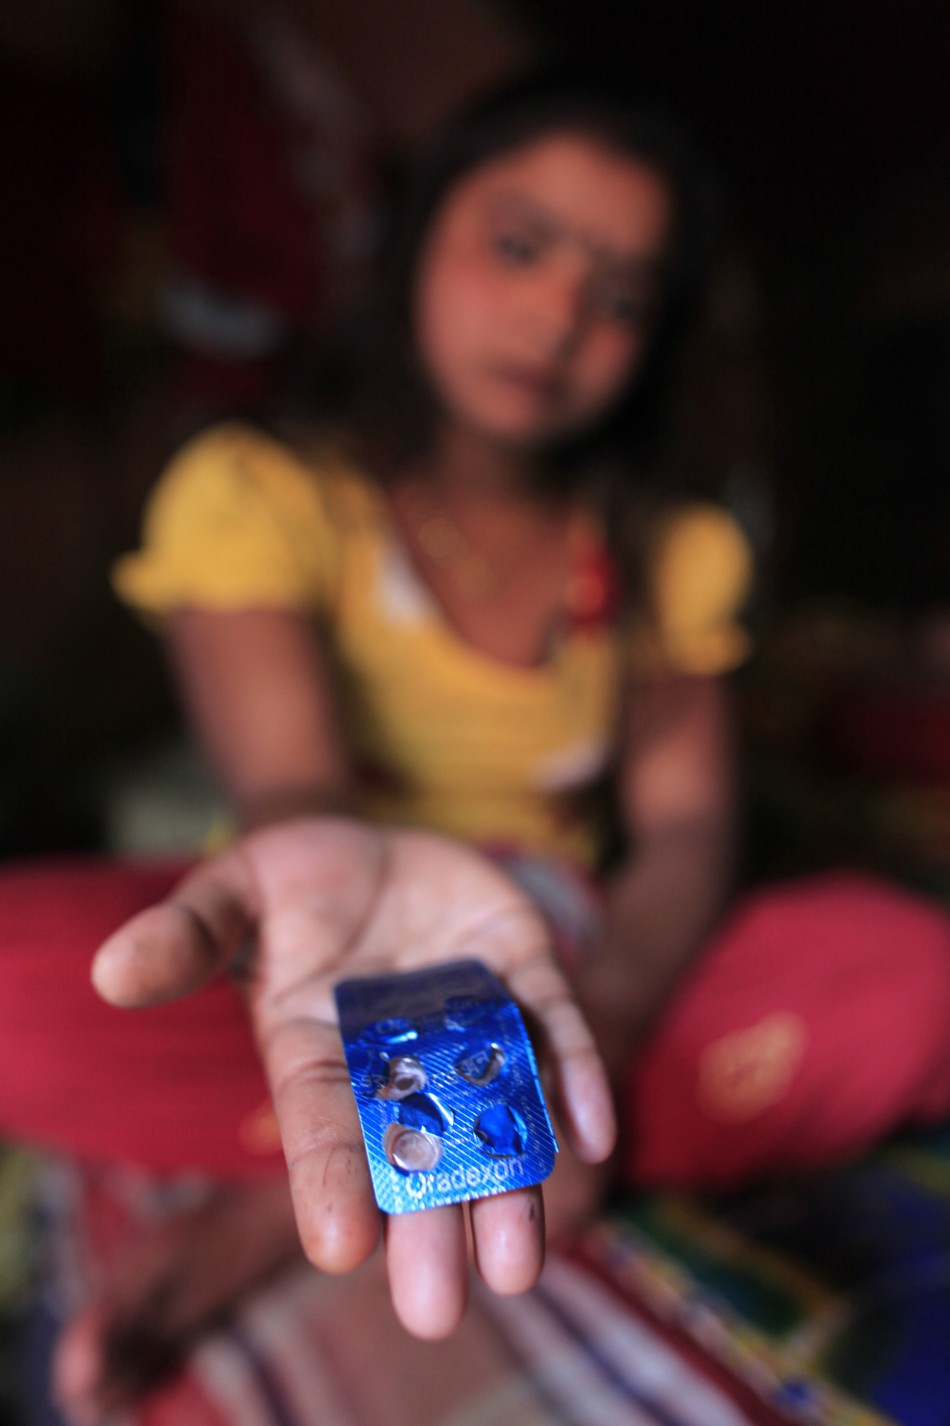 Seventeen-year-old prostitute Hashi shows Oradexon, a steroid, at Kandapara brothel in Tangail, a northeastern city of Bangladesh